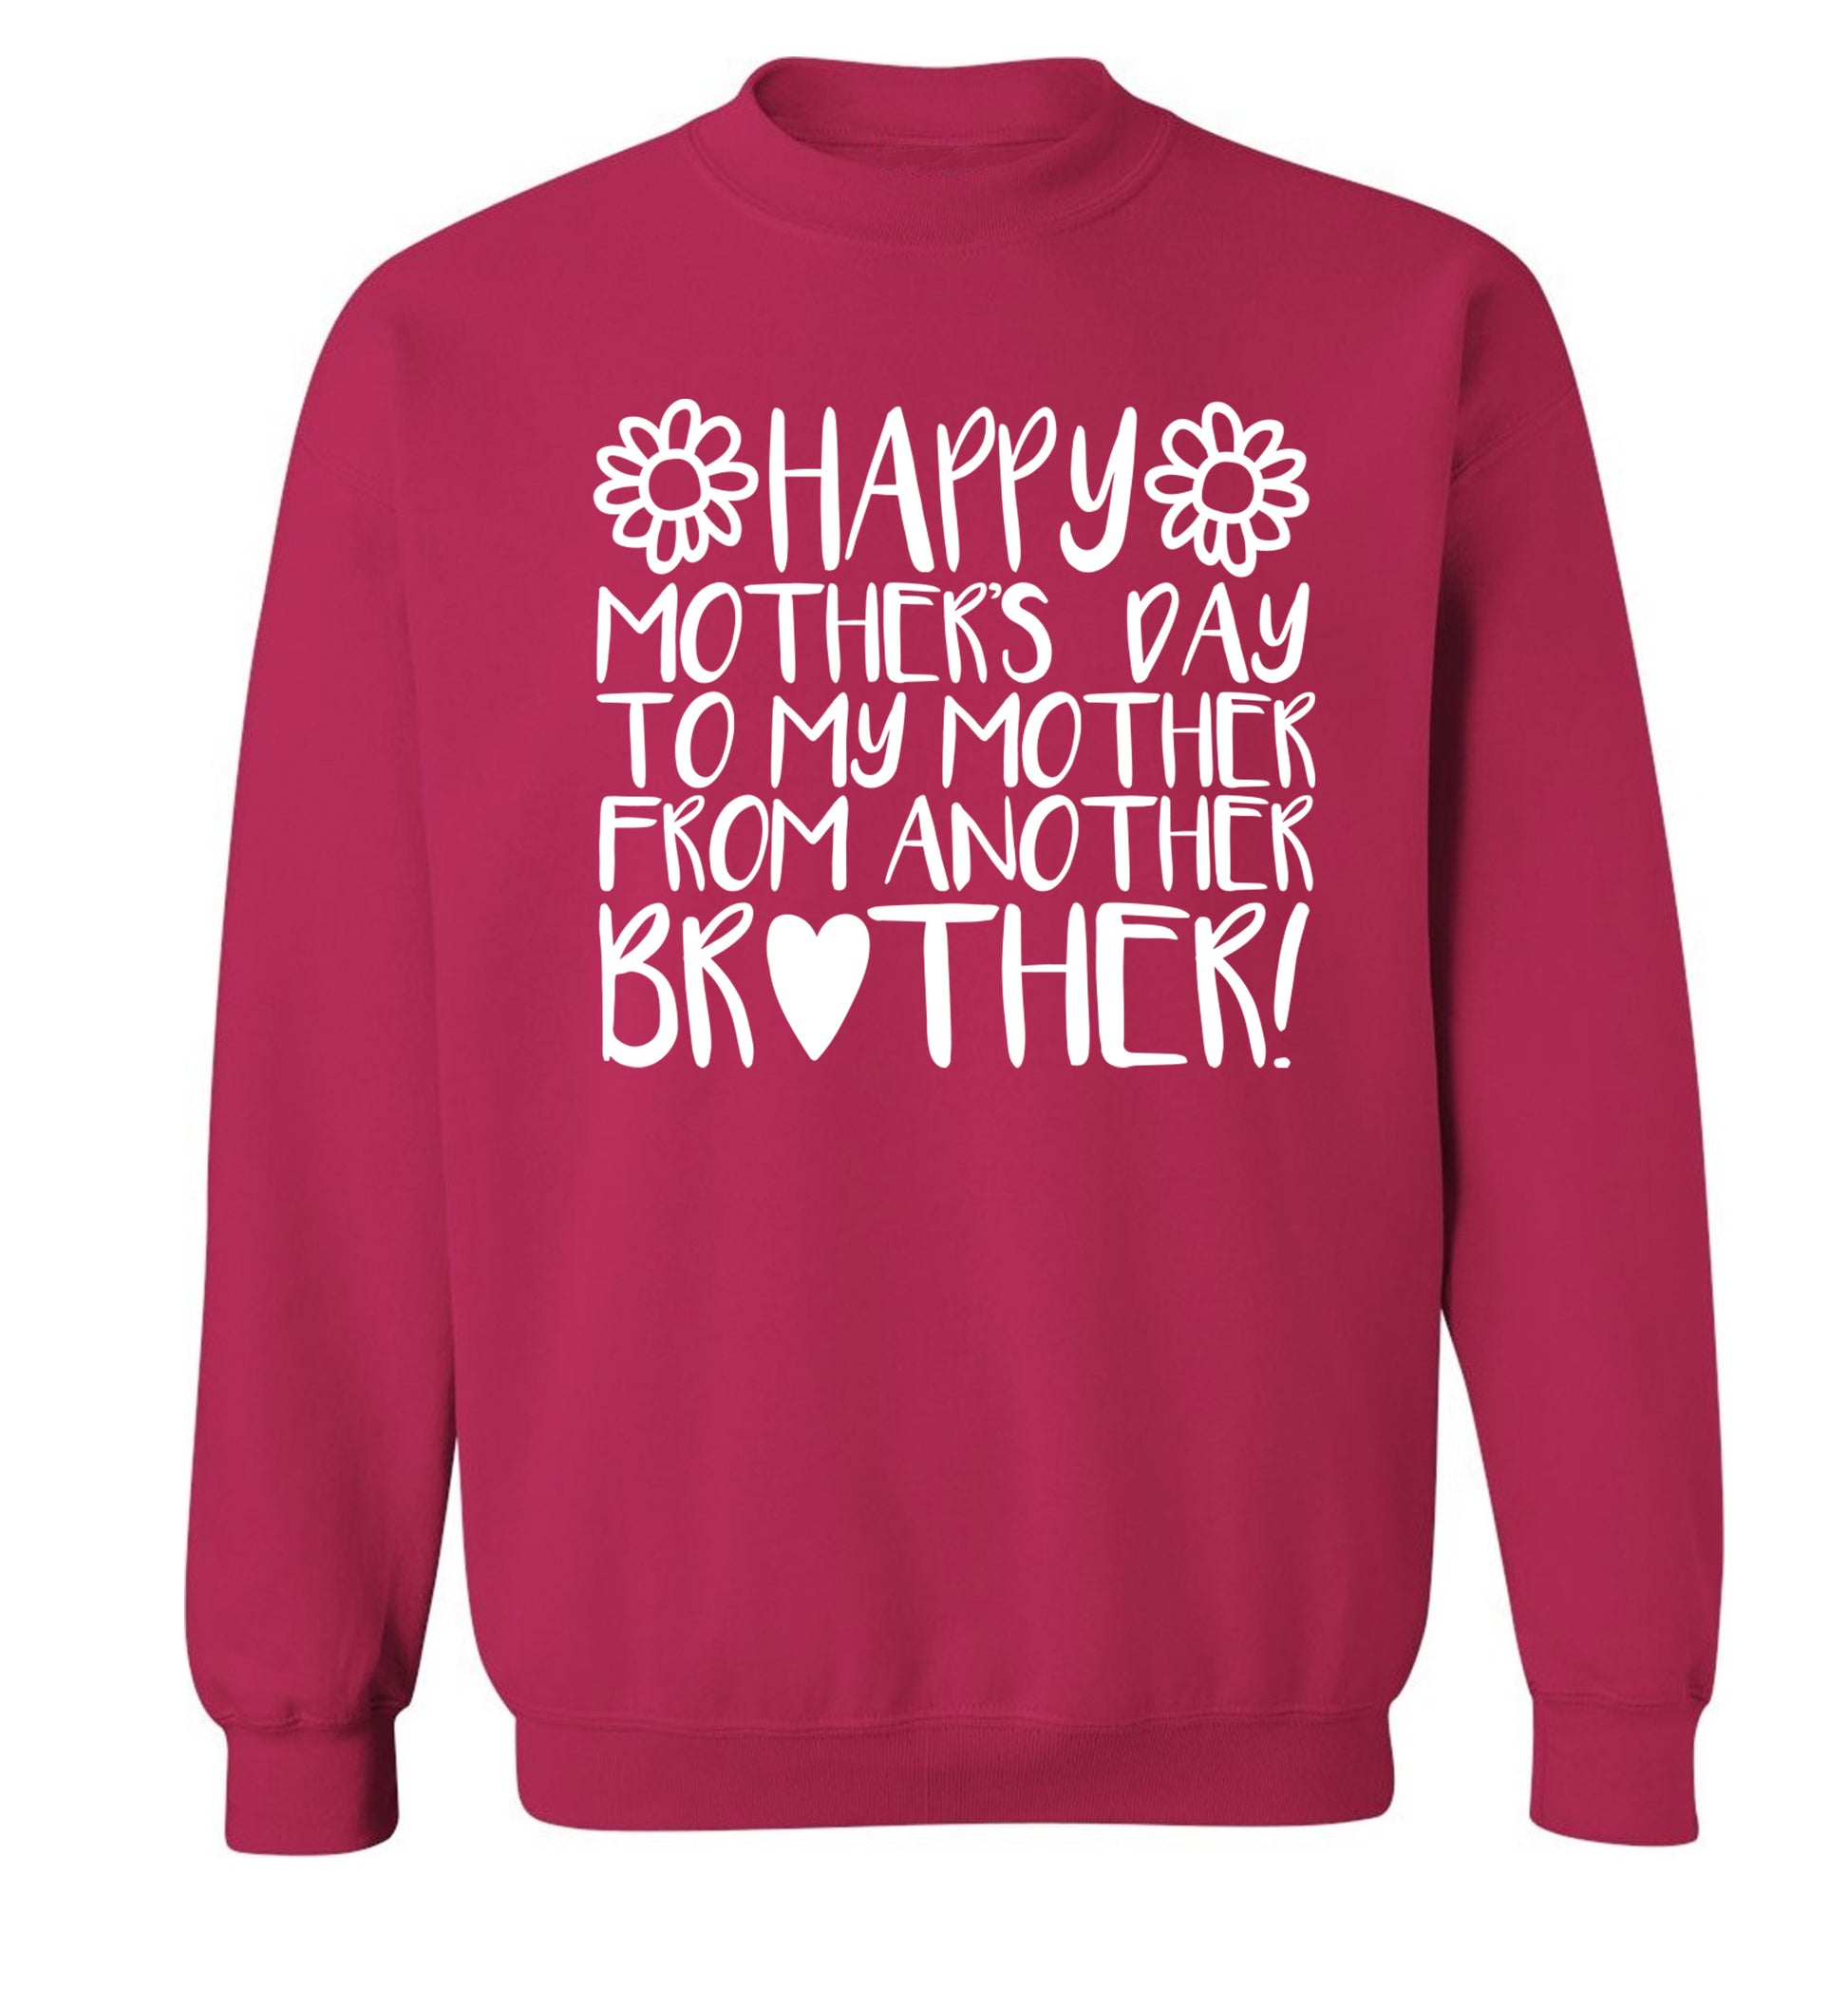 Happy mother's day to my mother from another brother Adult's unisex pink Sweater 2XL